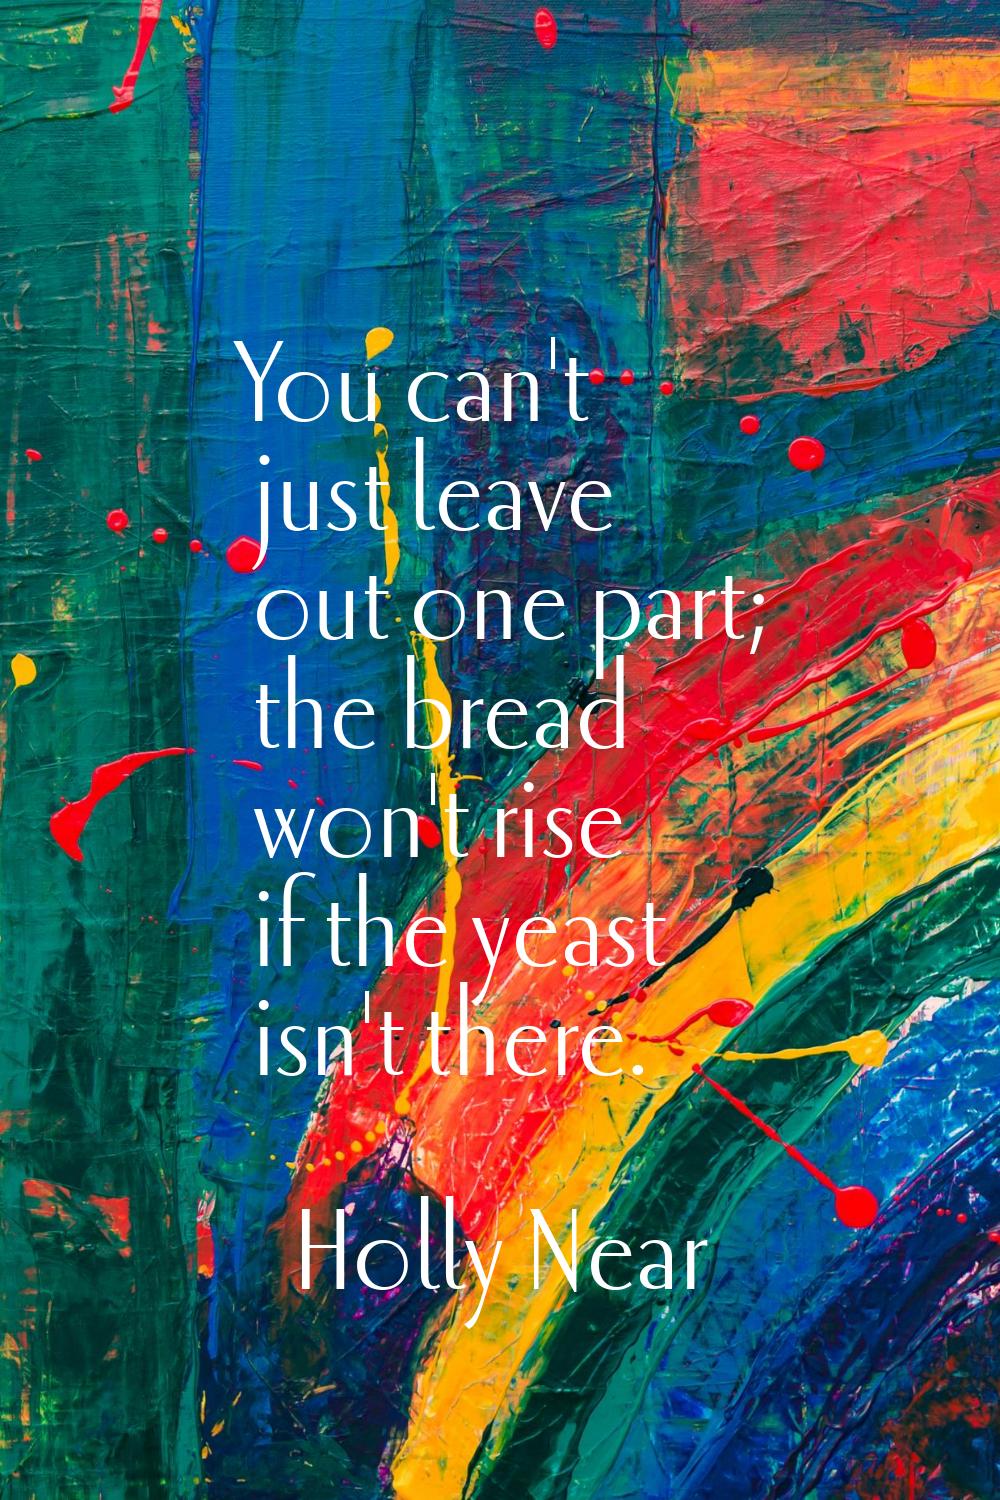 You can't just leave out one part; the bread won't rise if the yeast isn't there.